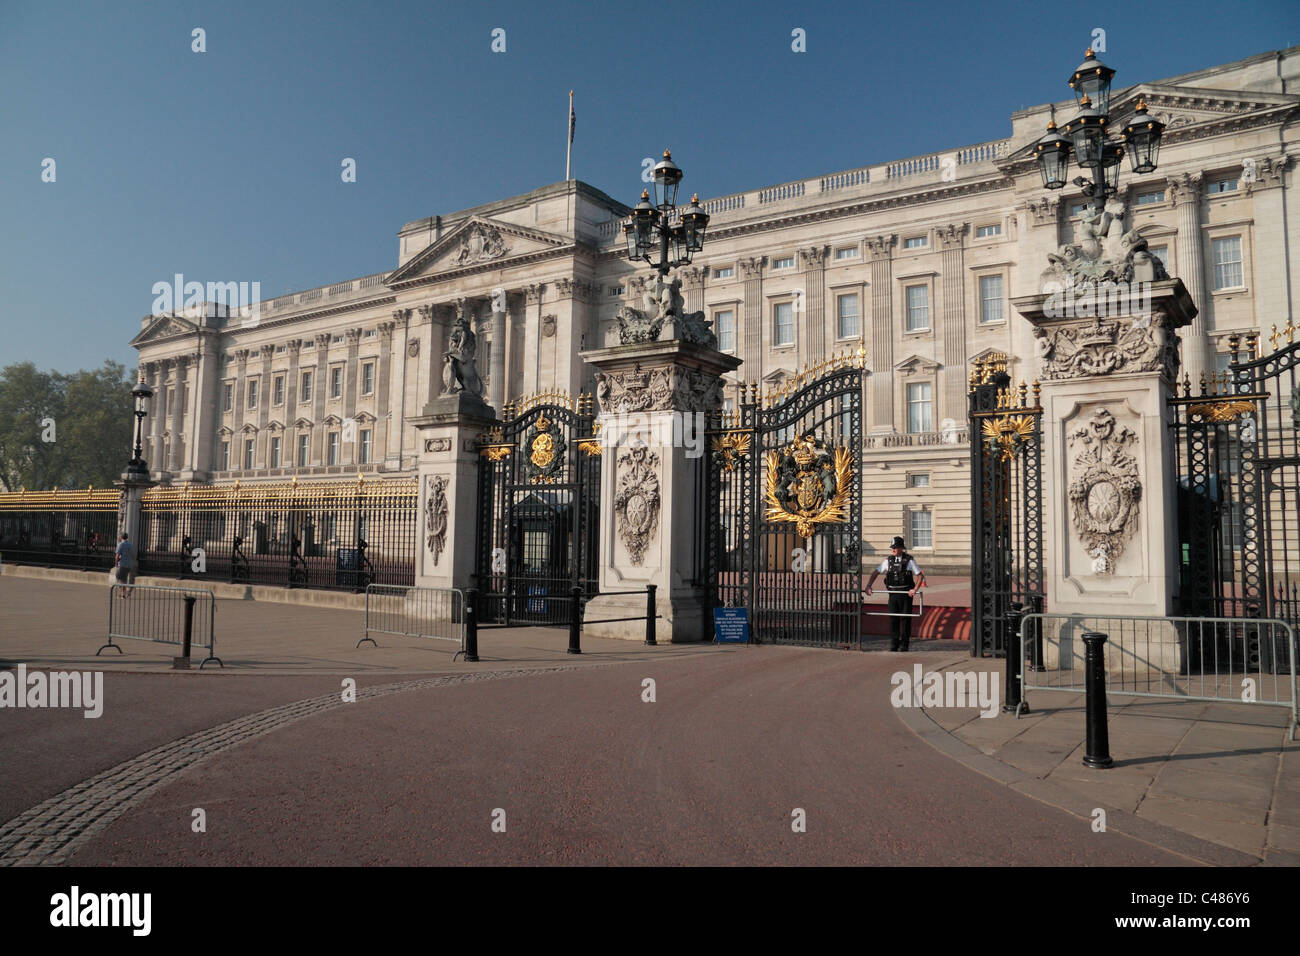 Early morning view of the main access gate to Buckingham Palace, London, UK. Stock Photo